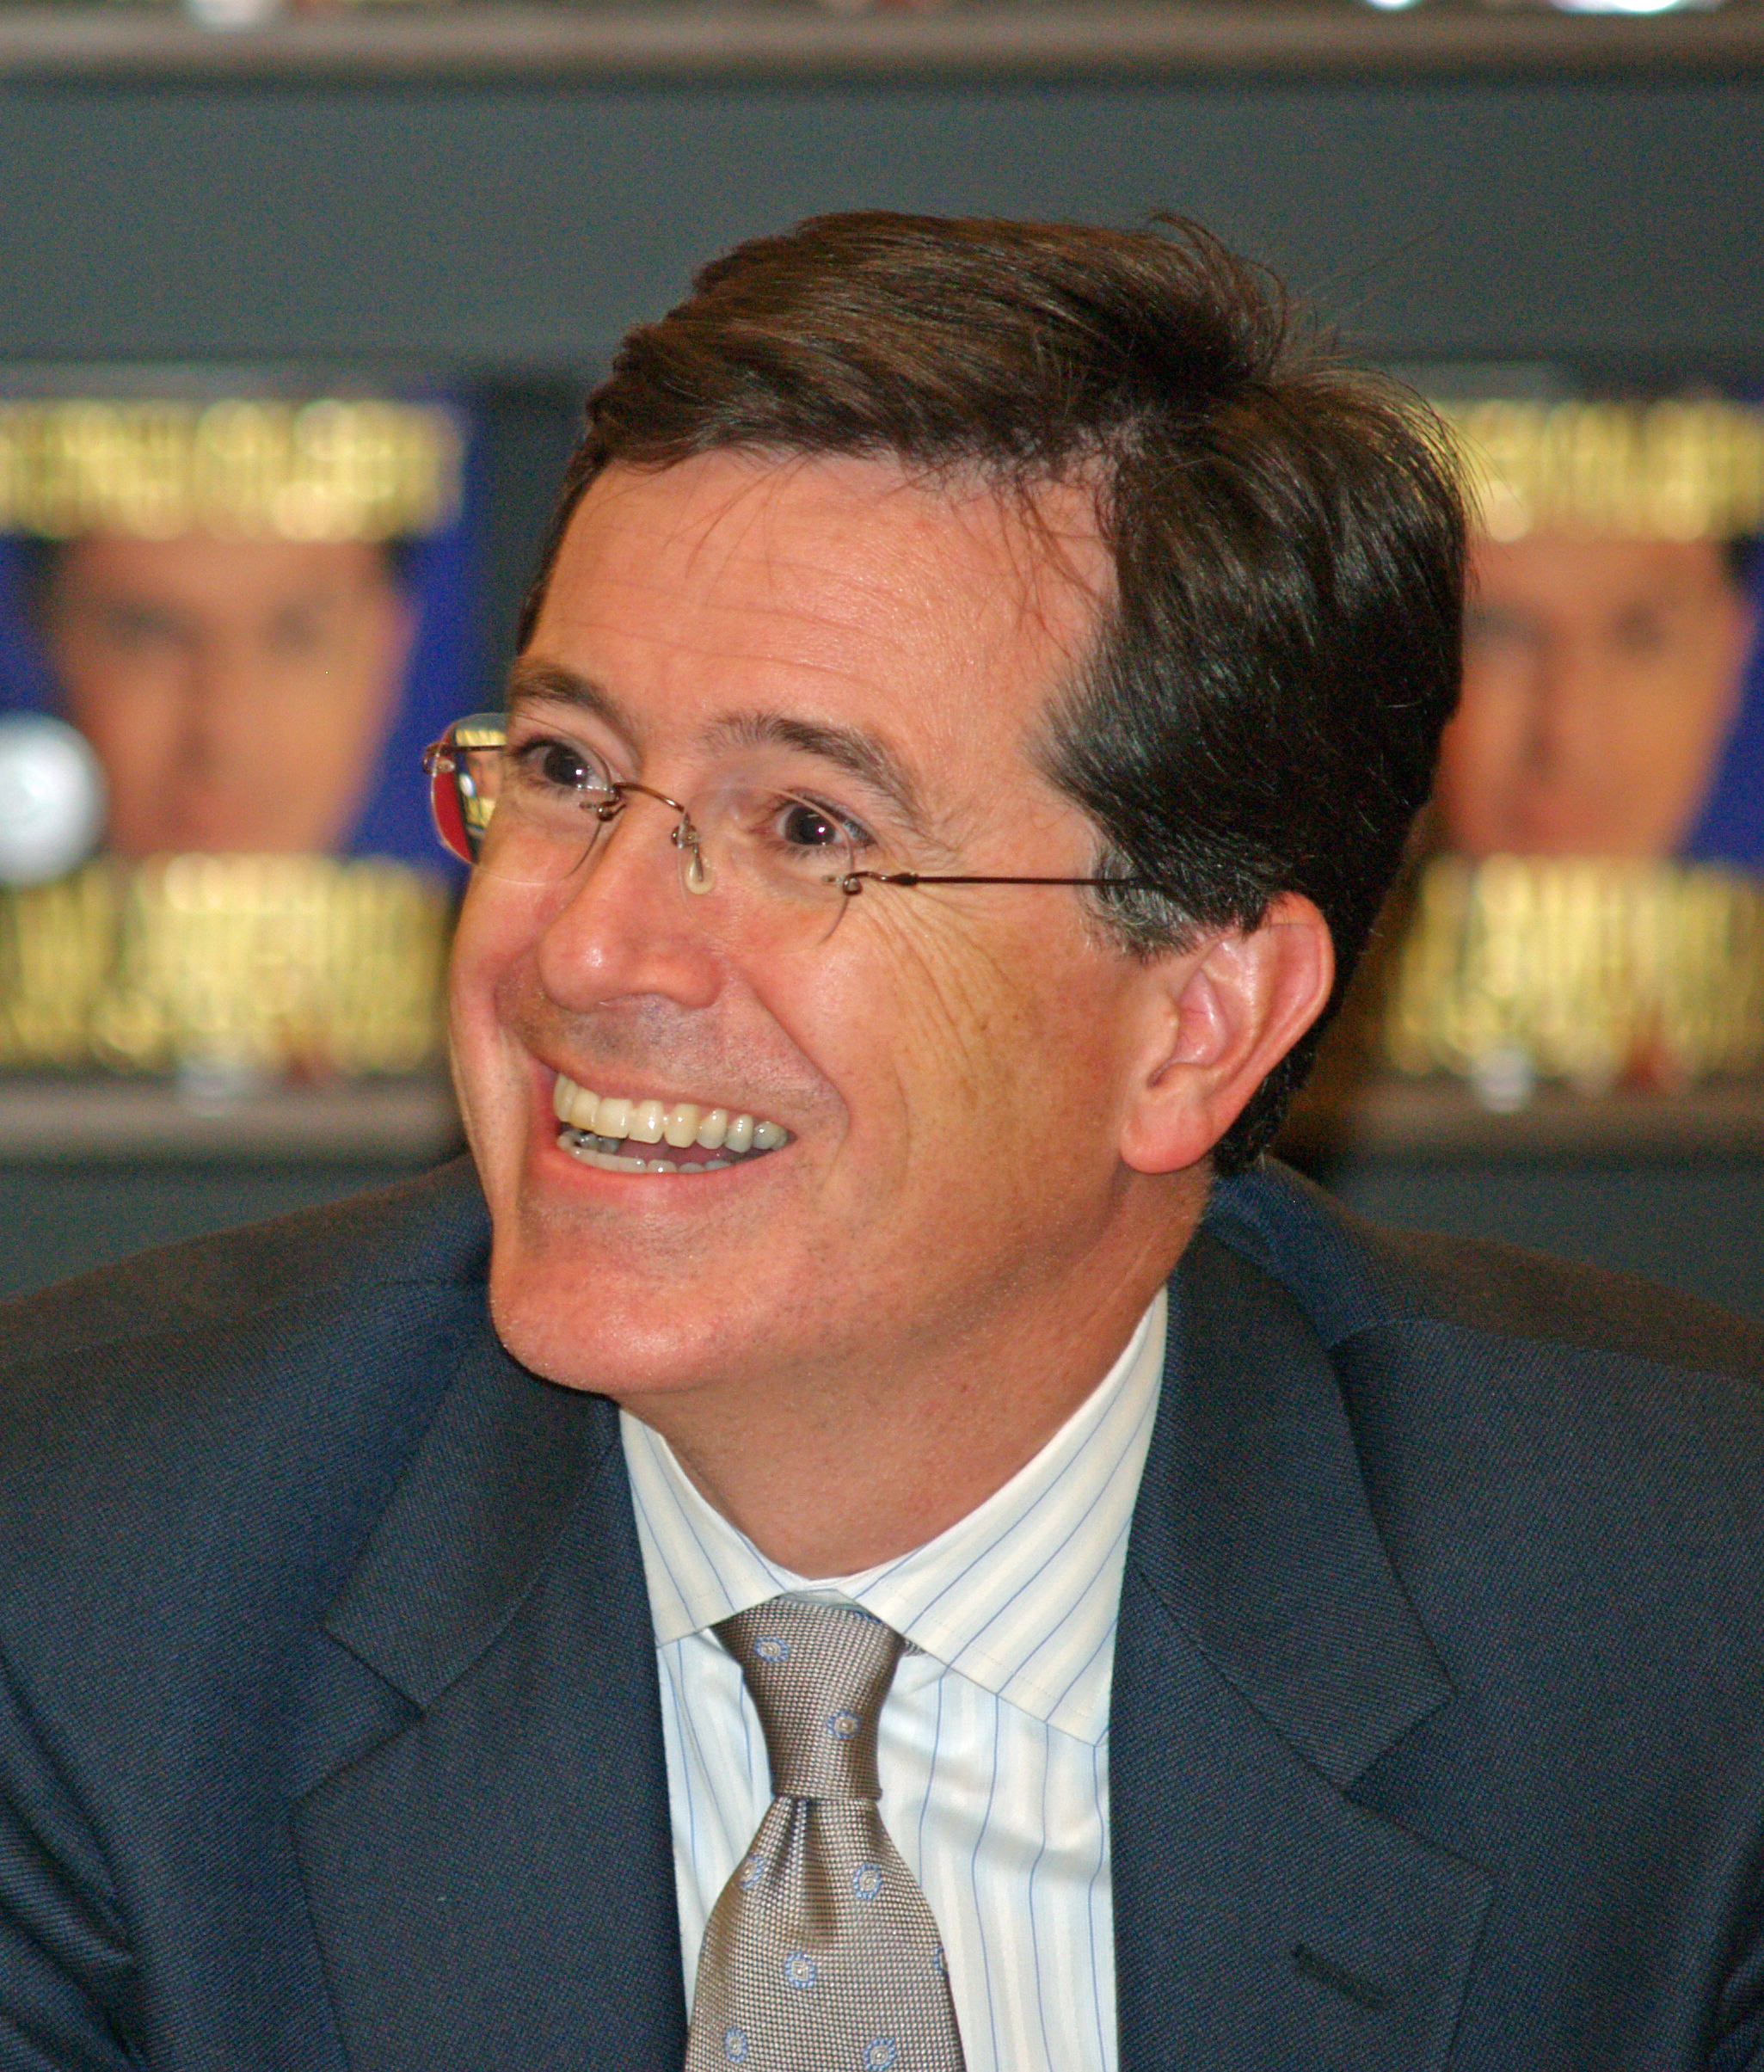 Stephen COLBERT of Comedy Centrals "The COLBERT Report"